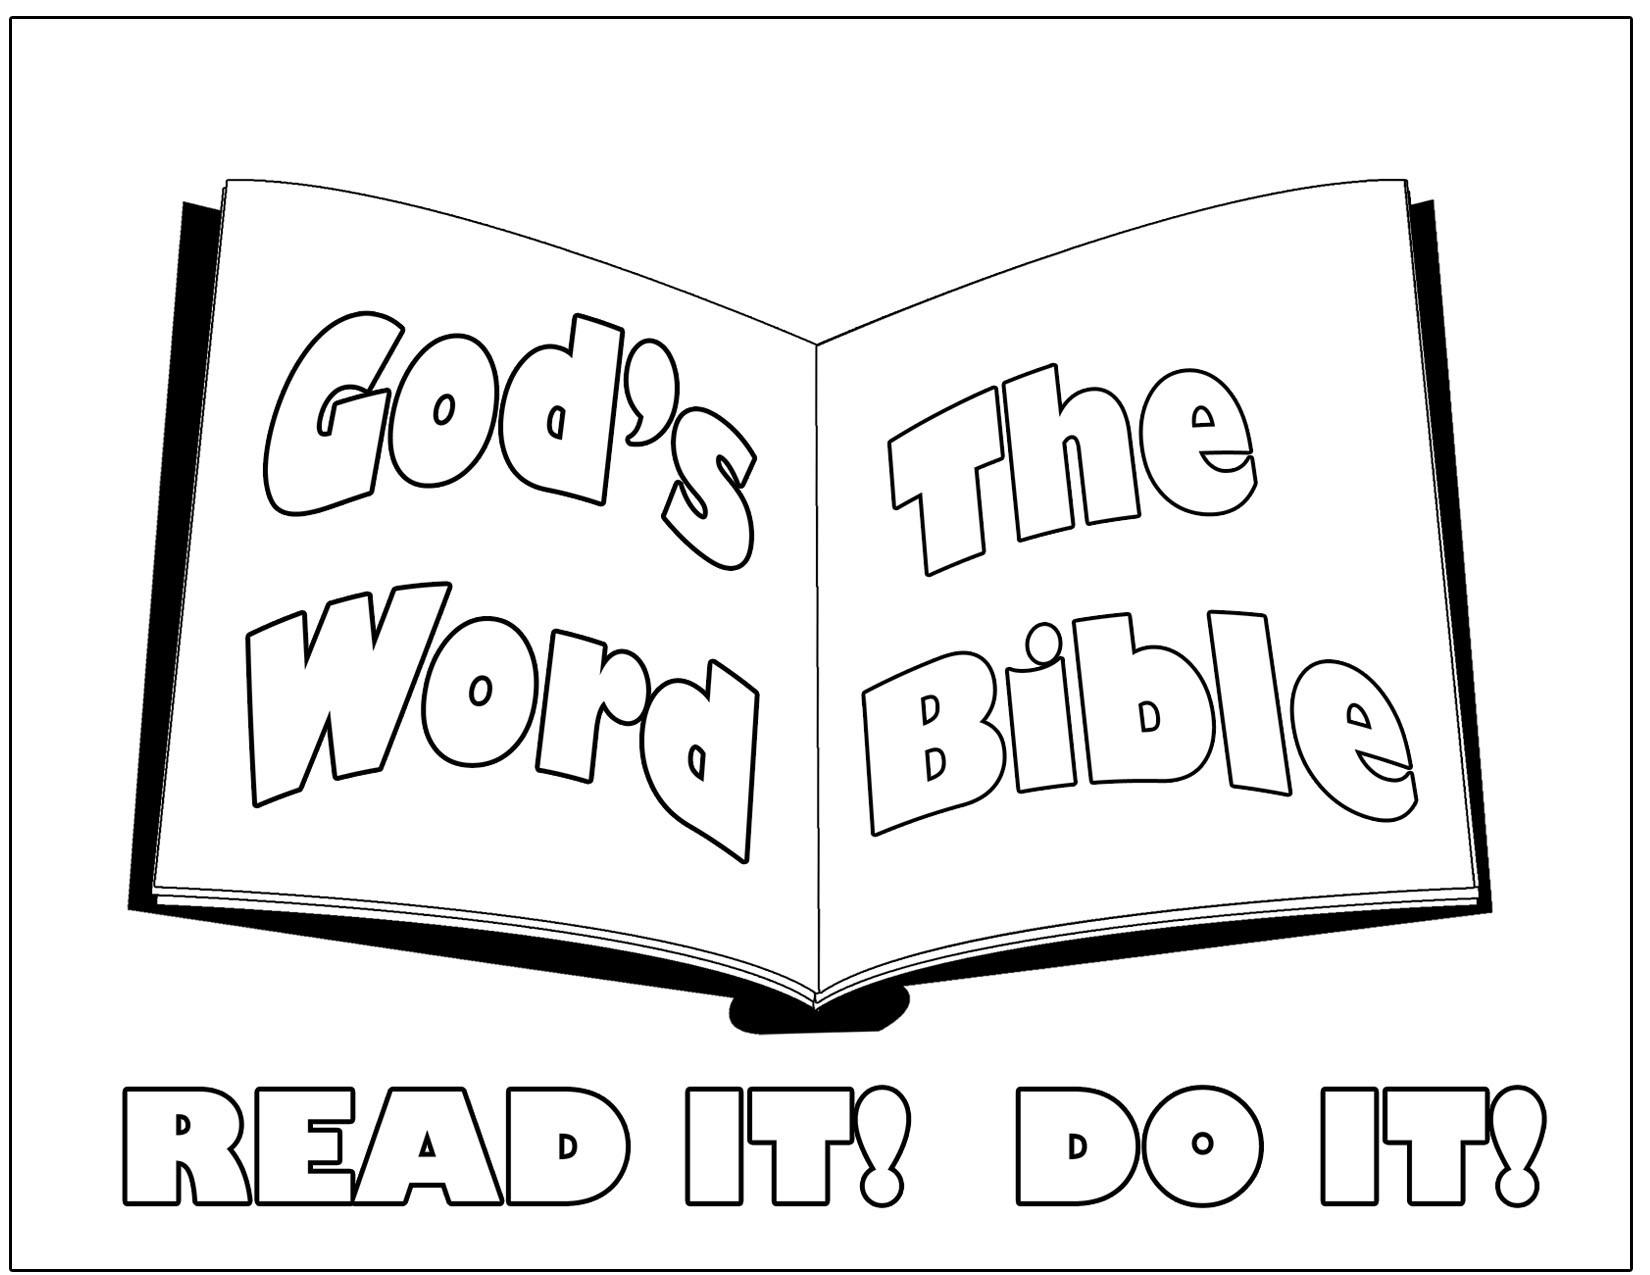 Free Printable Bible Coloring Pages For Kids Coloring Wallpapers Download Free Images Wallpaper [coloring436.blogspot.com]